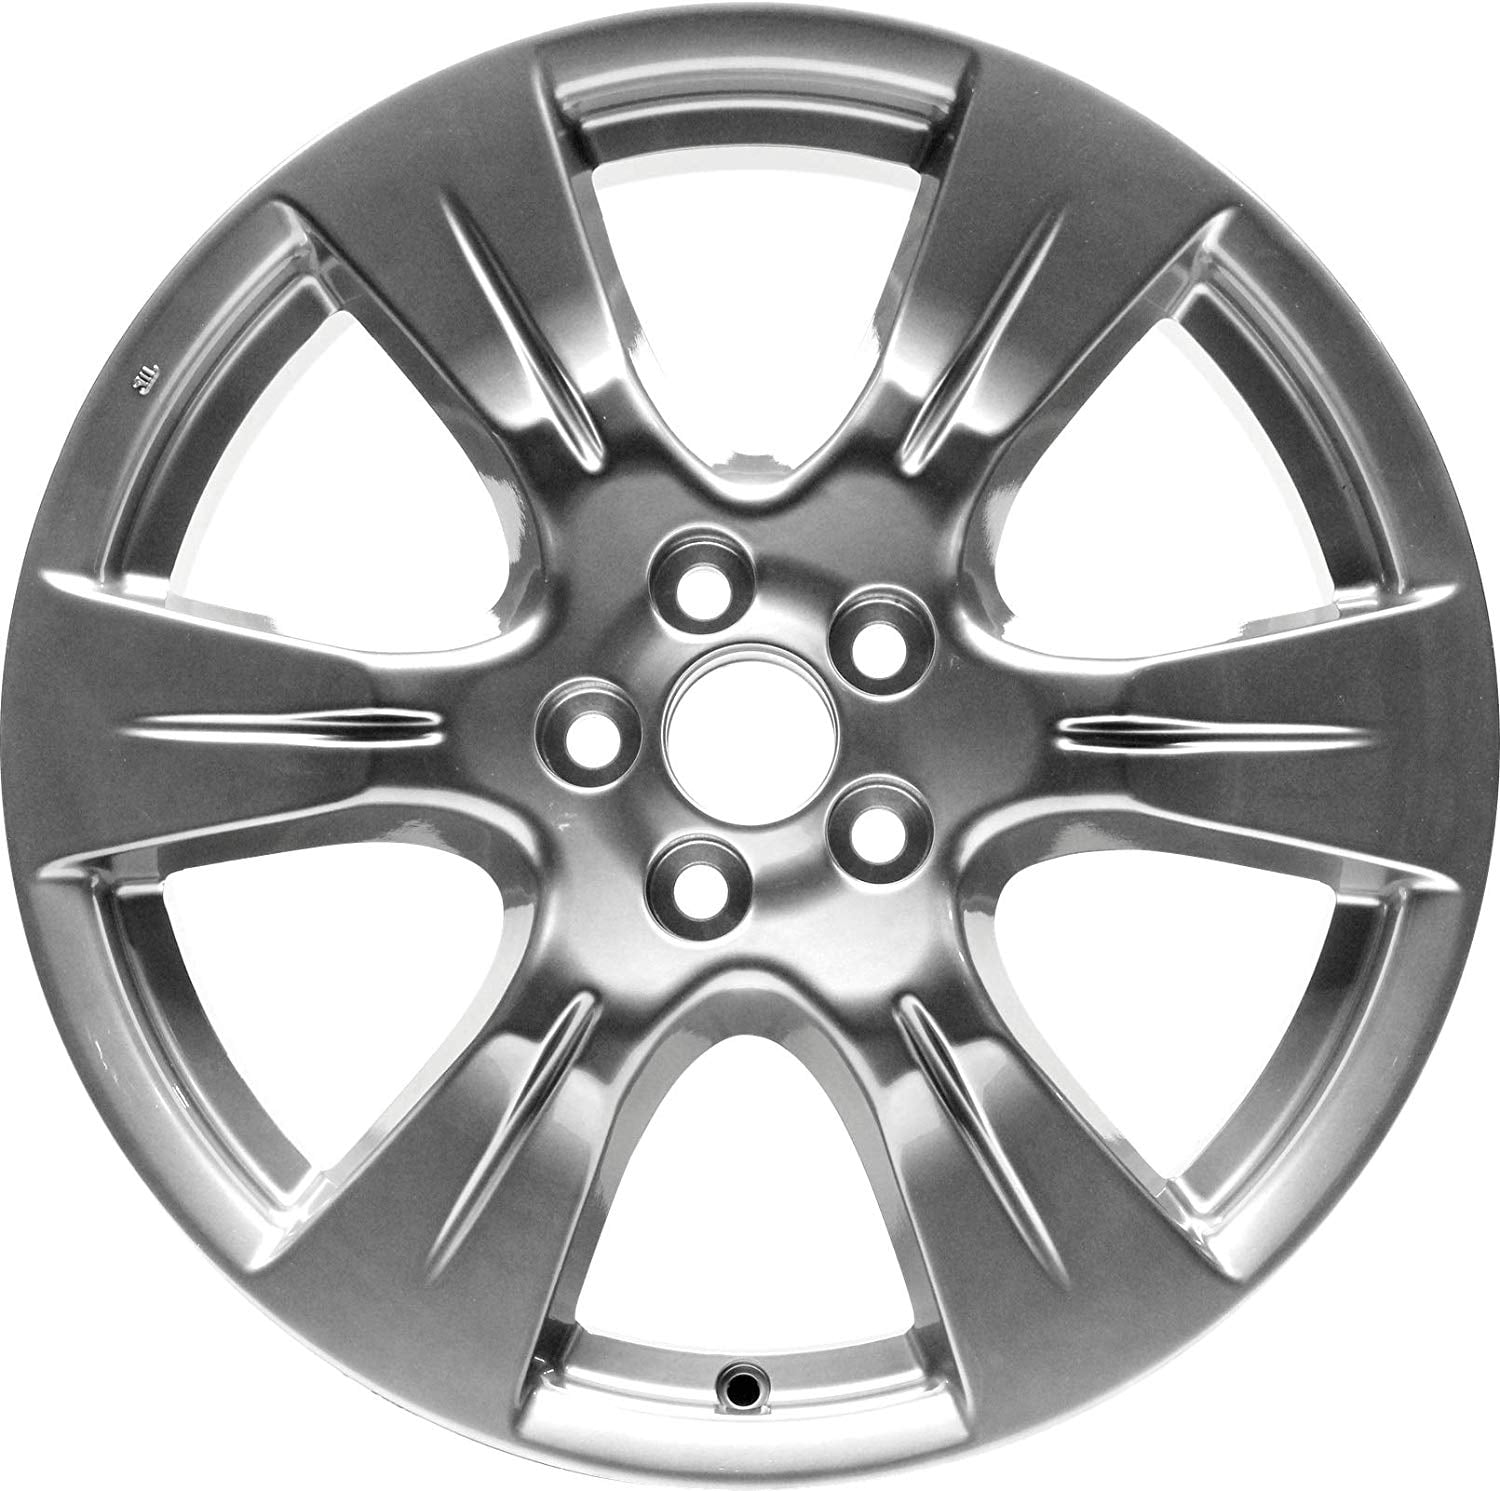 Partsynergy Replacement For New Aluminum Alloy Wheel Rim 16 Inch Fits 07-10 Toyota Sienna 6 Spokes 5-114.3mm